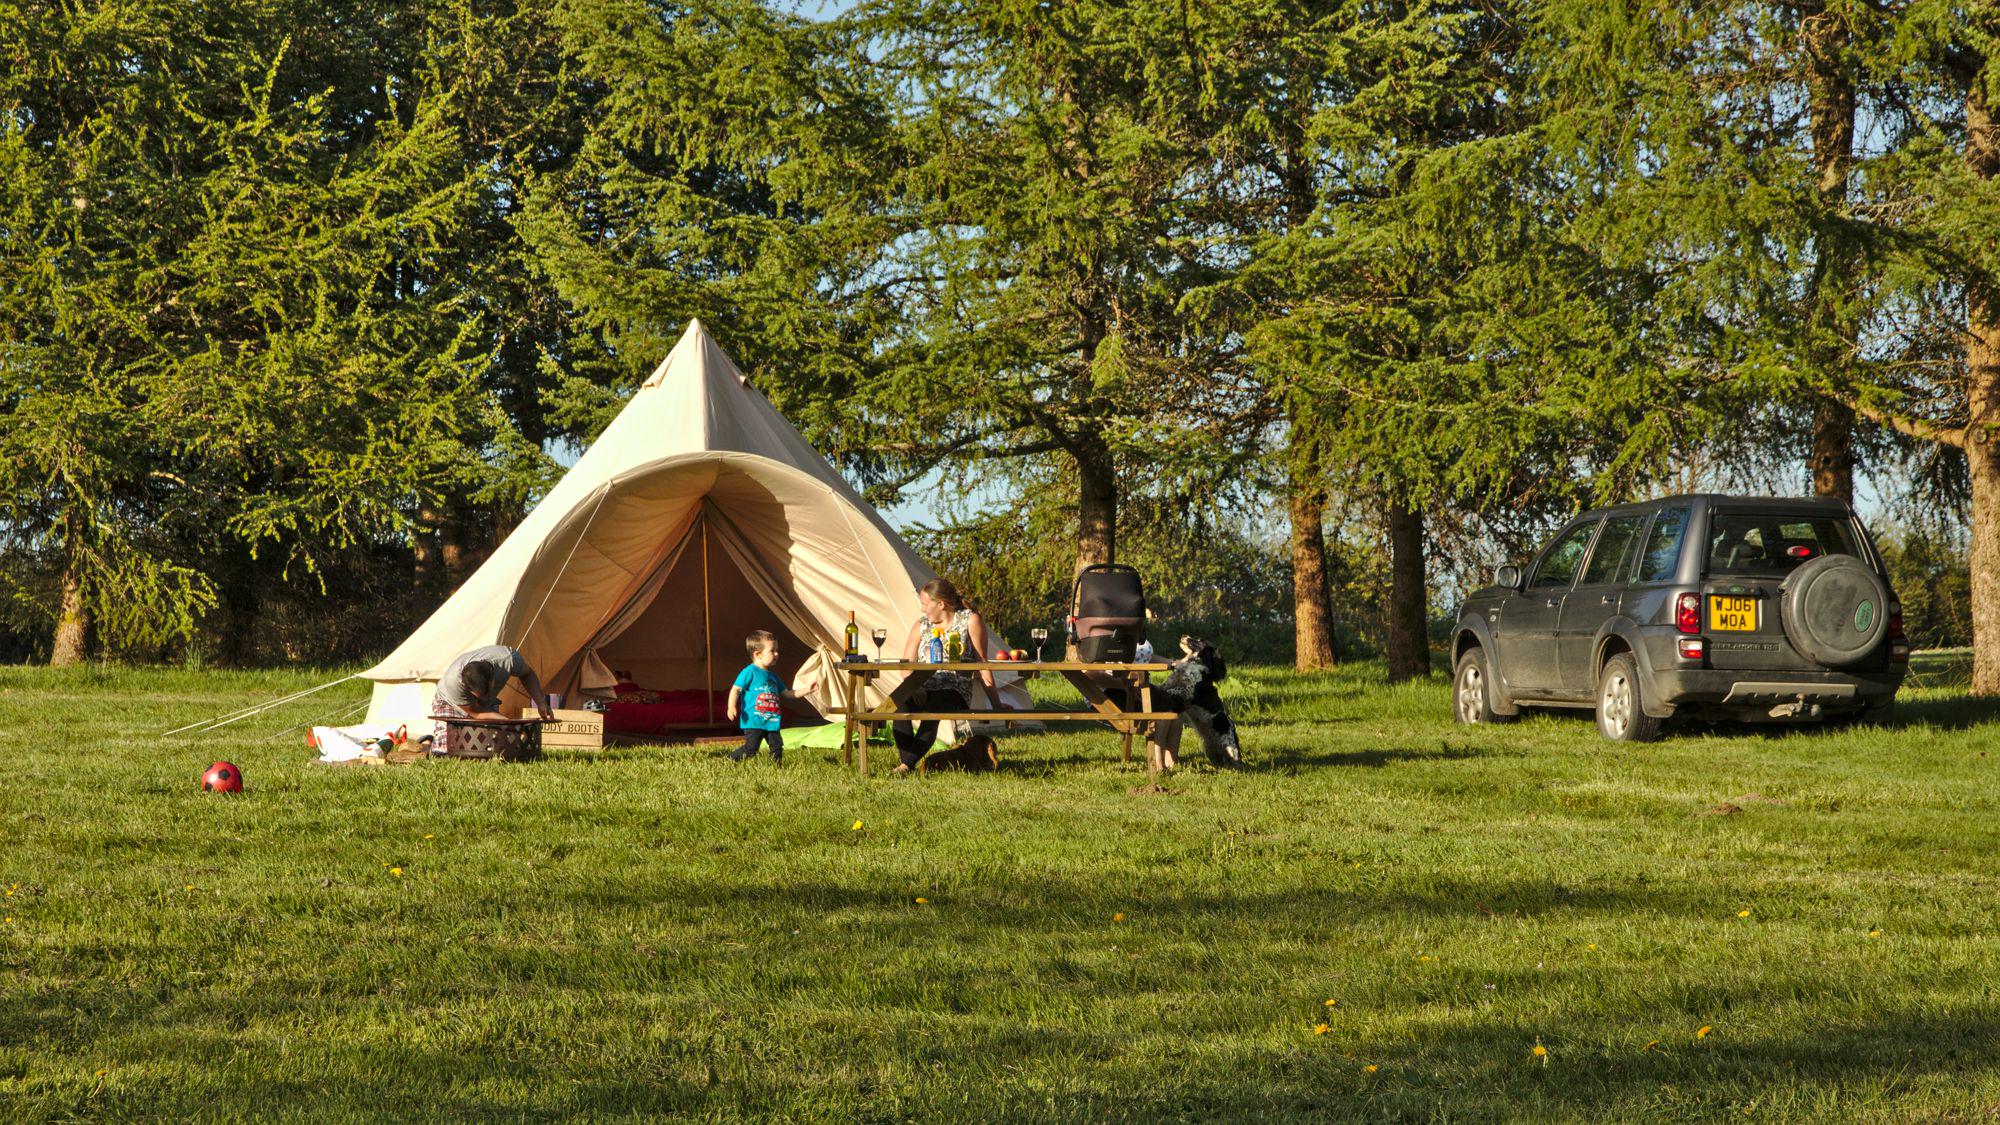 Dog-Friendly Camping in South Wales | Pods, campsites with dogs allowed